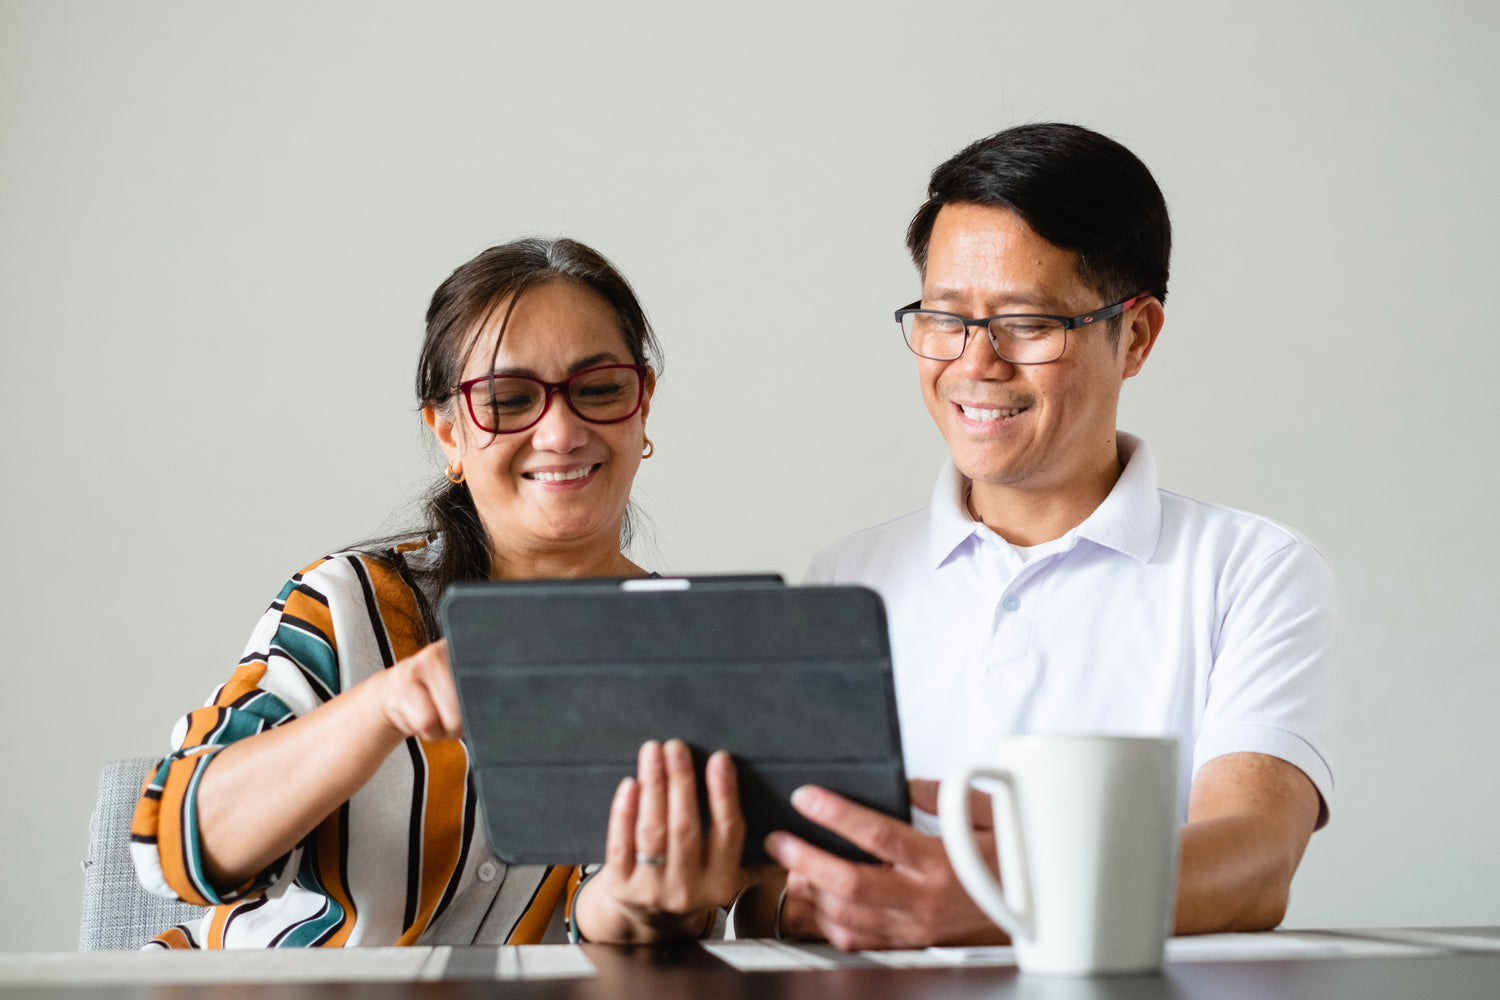  COUPLE SMILE AS THEy USE A TABLET